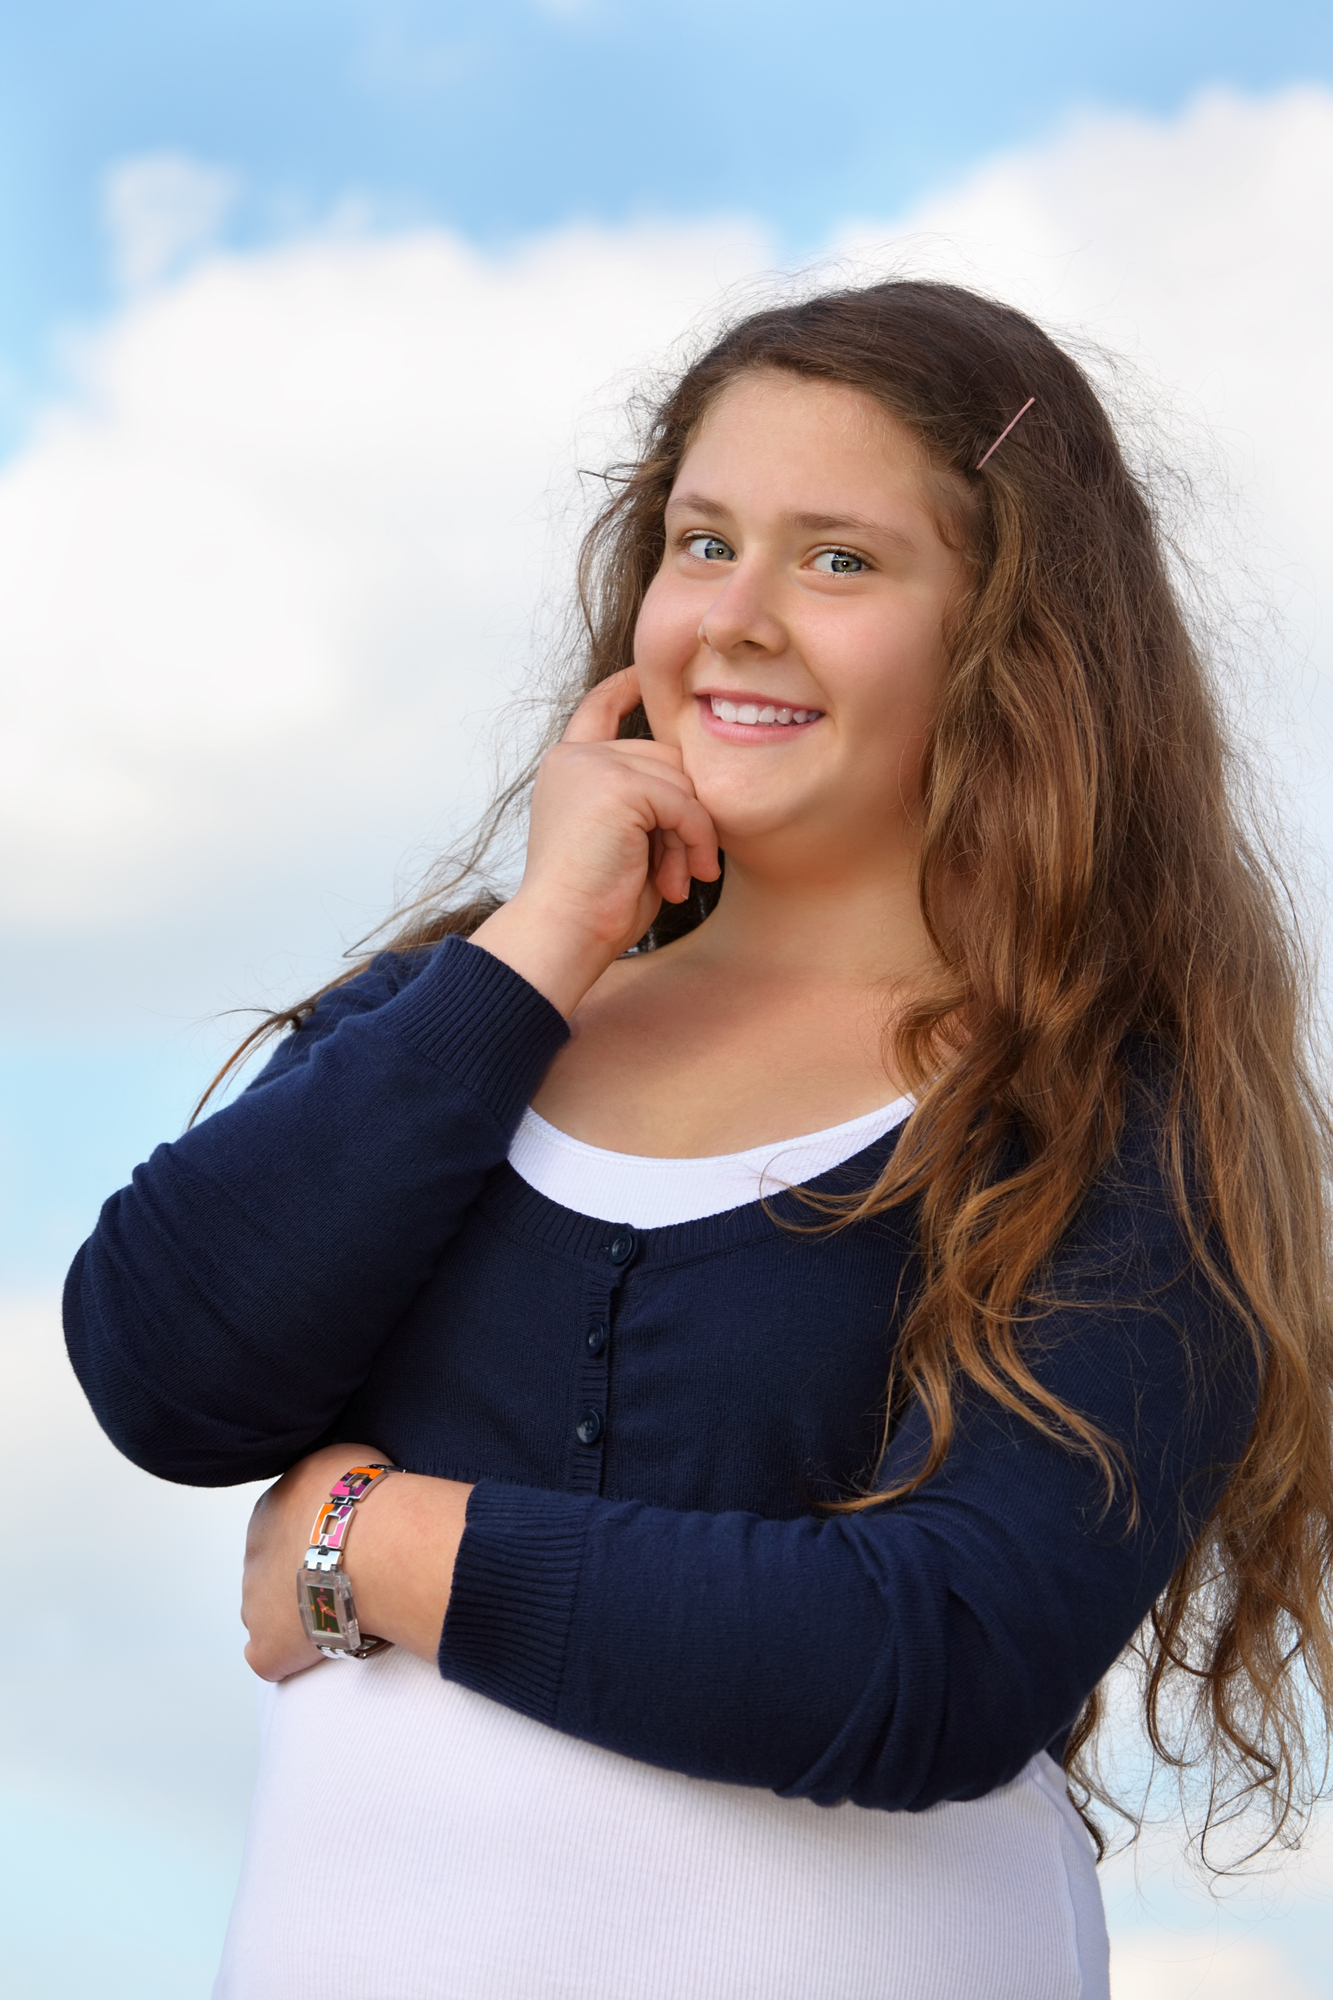 Beautiful smiling girl looks at camera at background of blue sky with clouds.